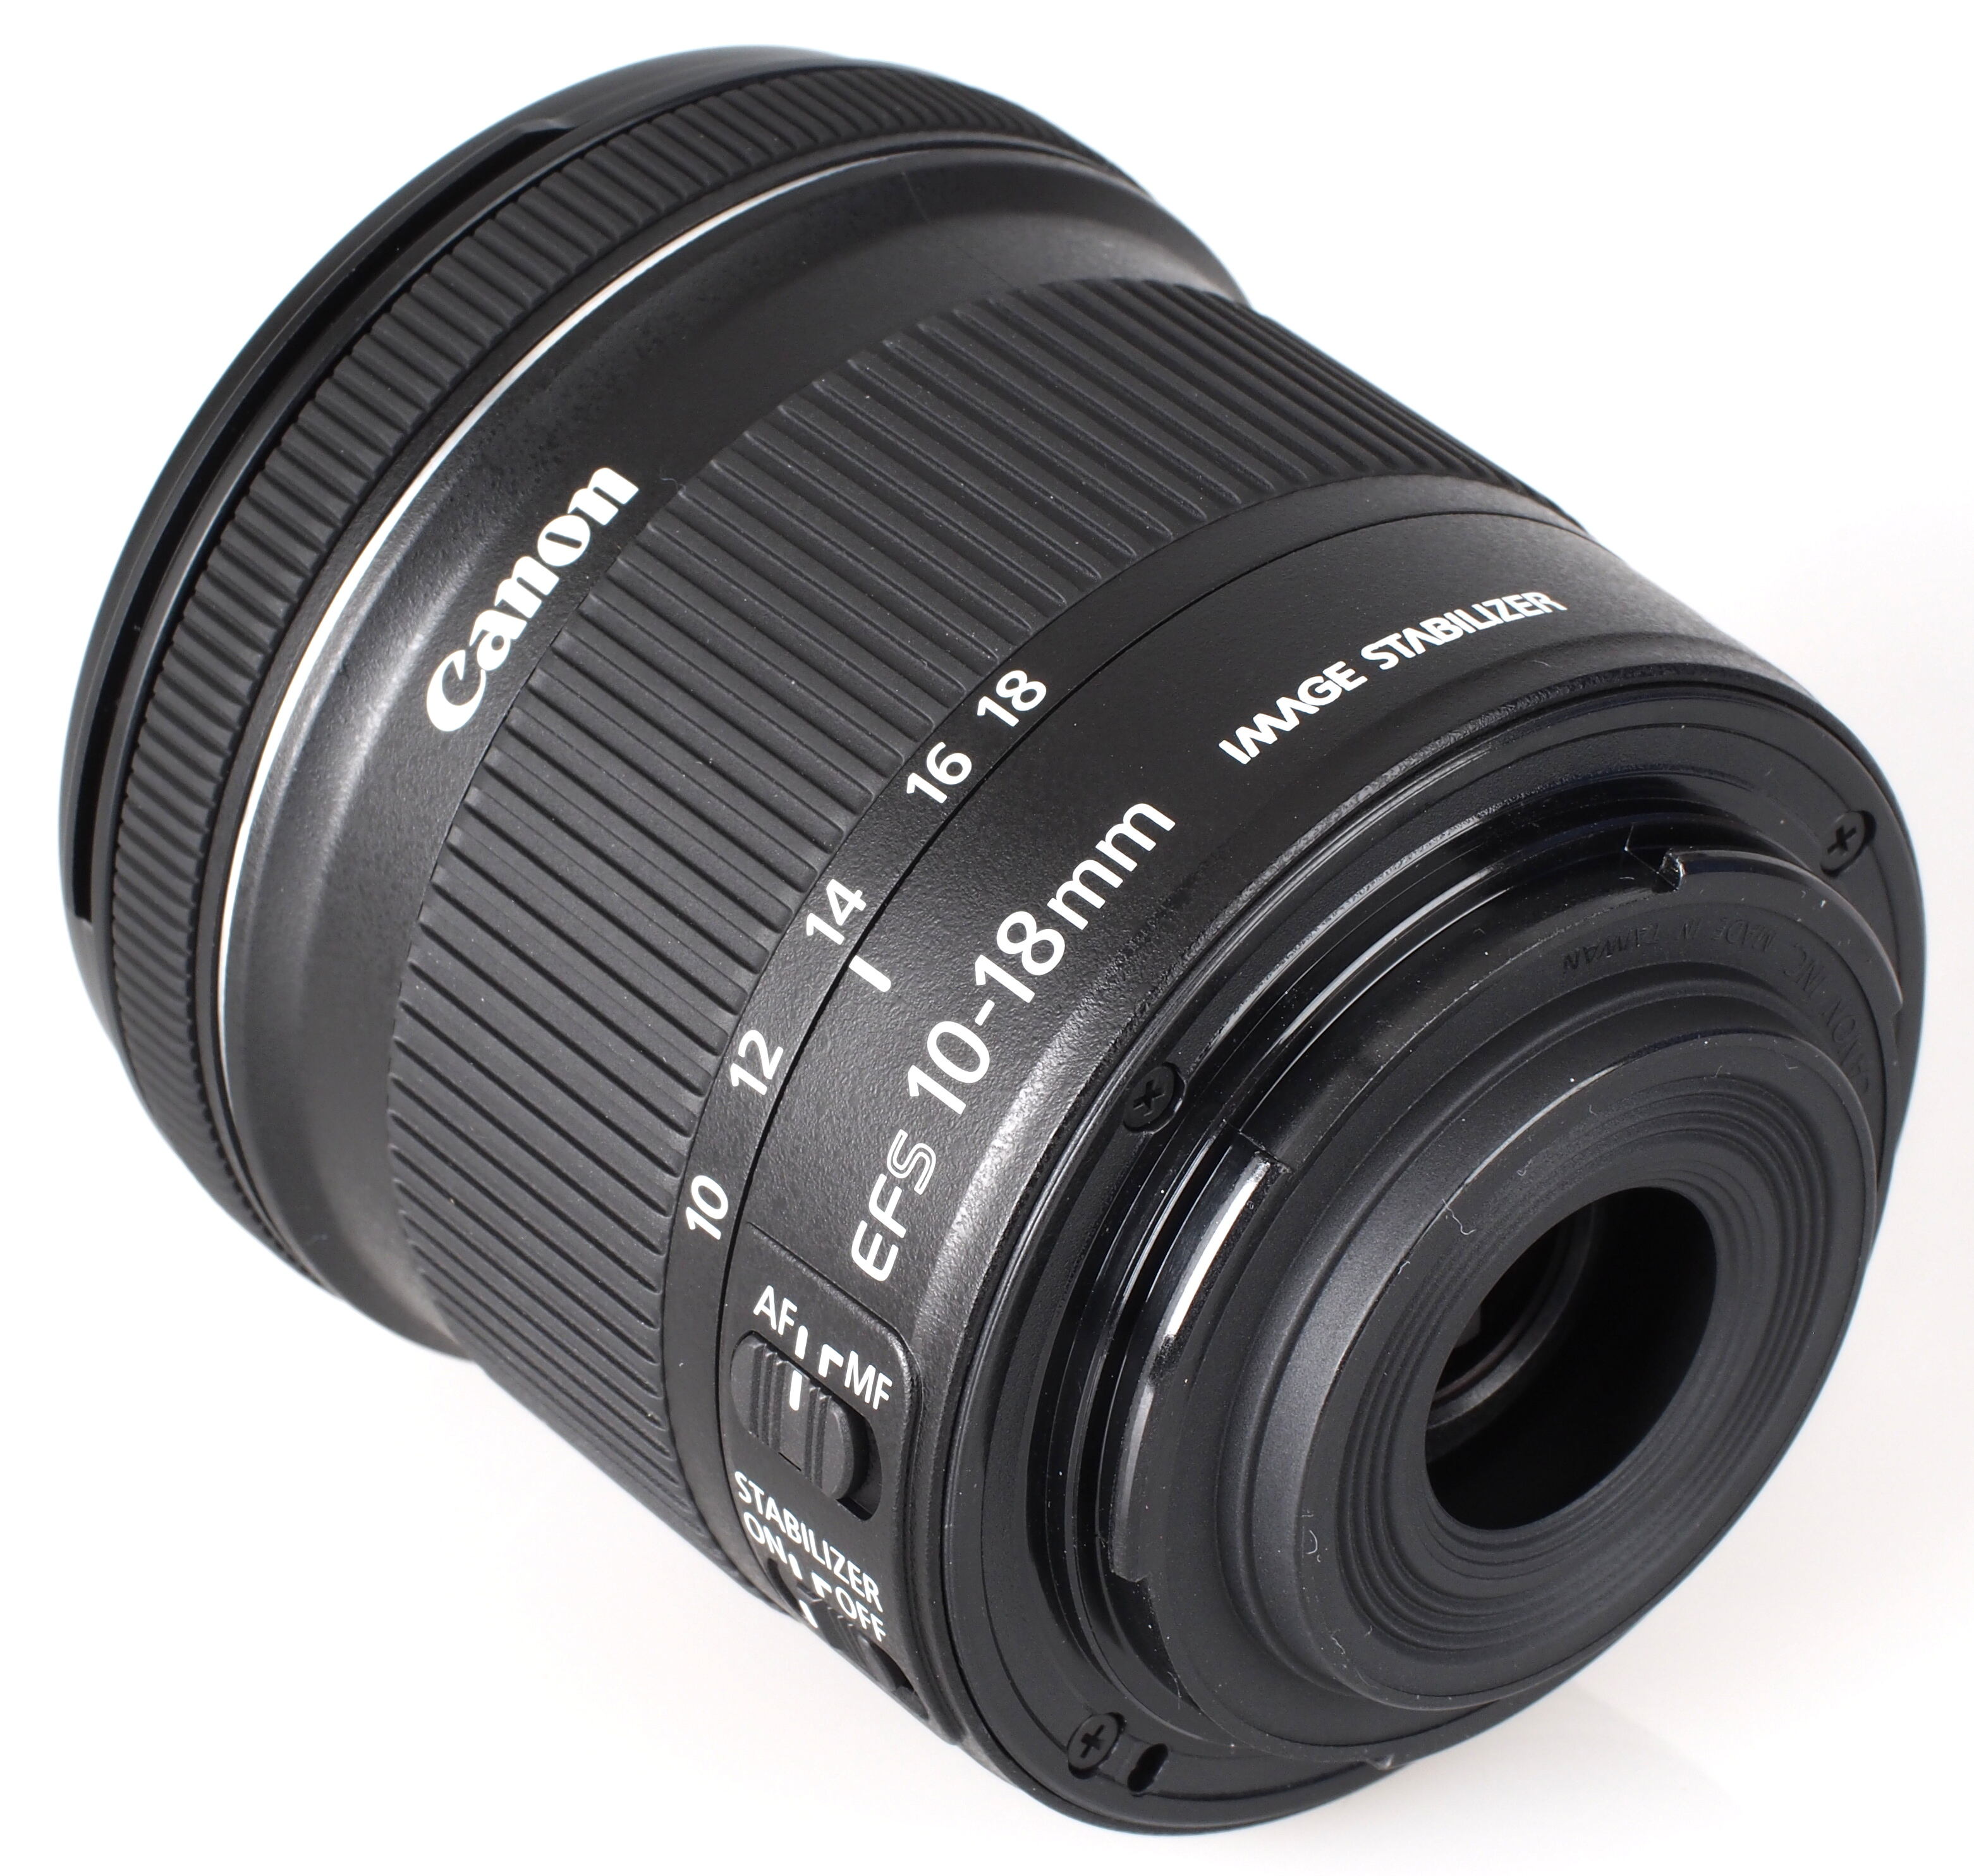 Canon EF-S 10-18mm f/4.5-5.6 IS STM Lens Review